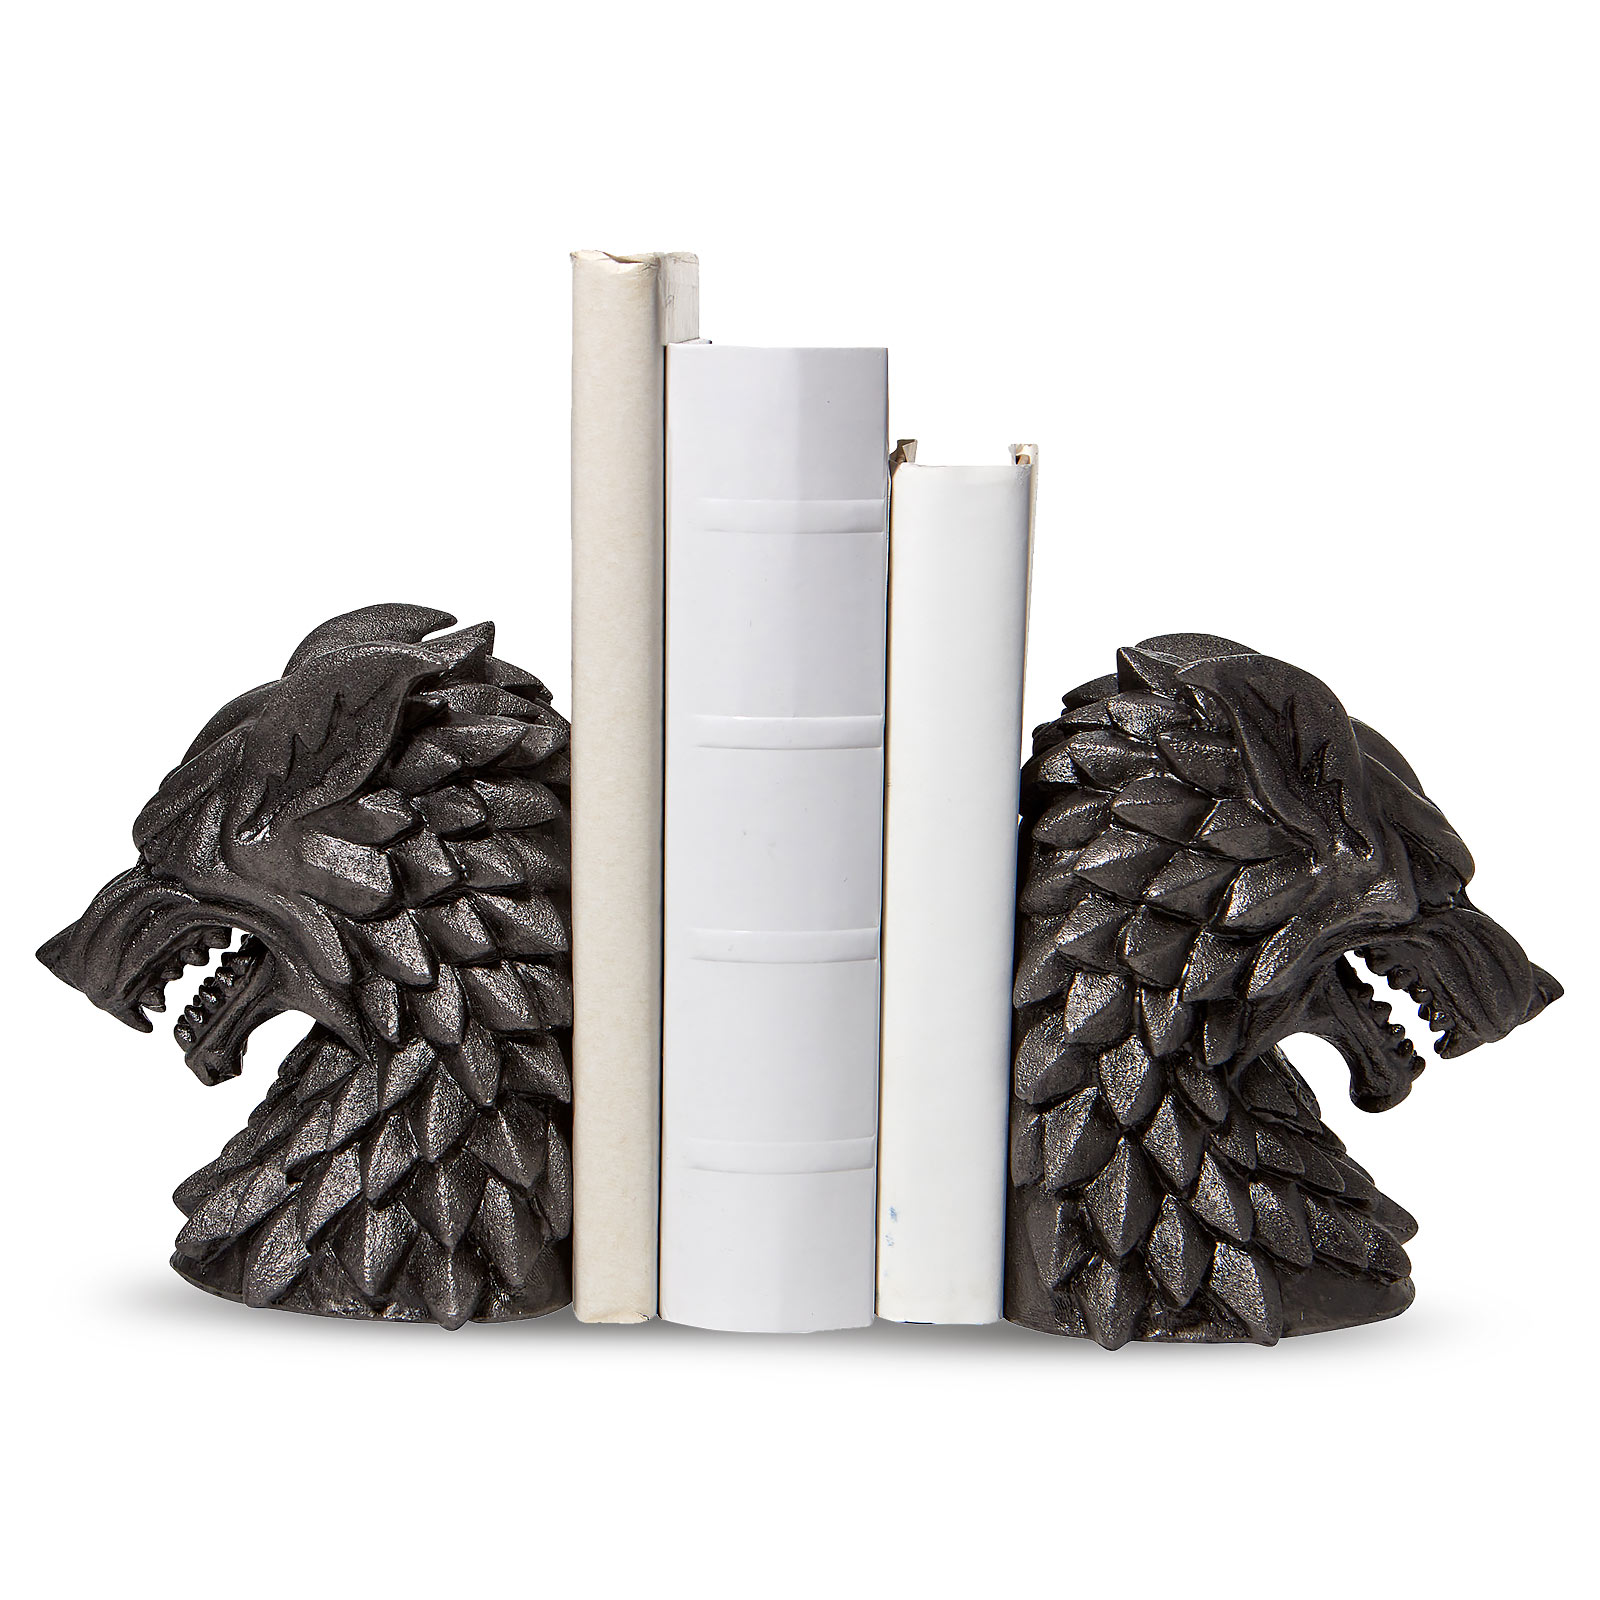 Game of Thrones - House Stark Bookends